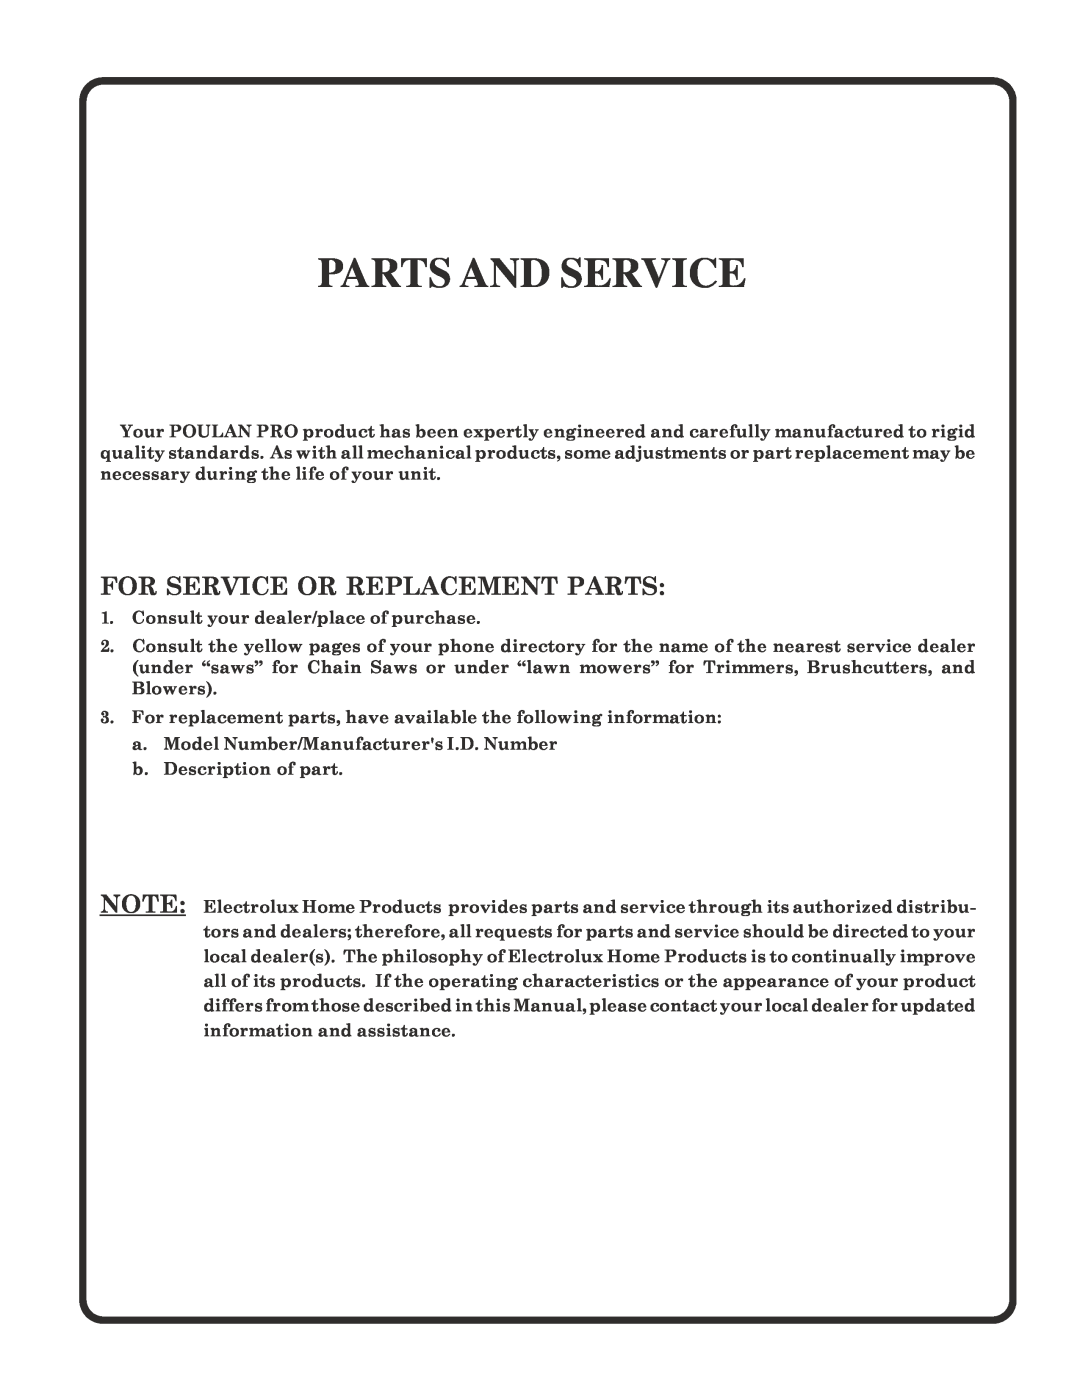 Poulan 180196 owner manual Parts And Service, For Service Or Replacement Parts 